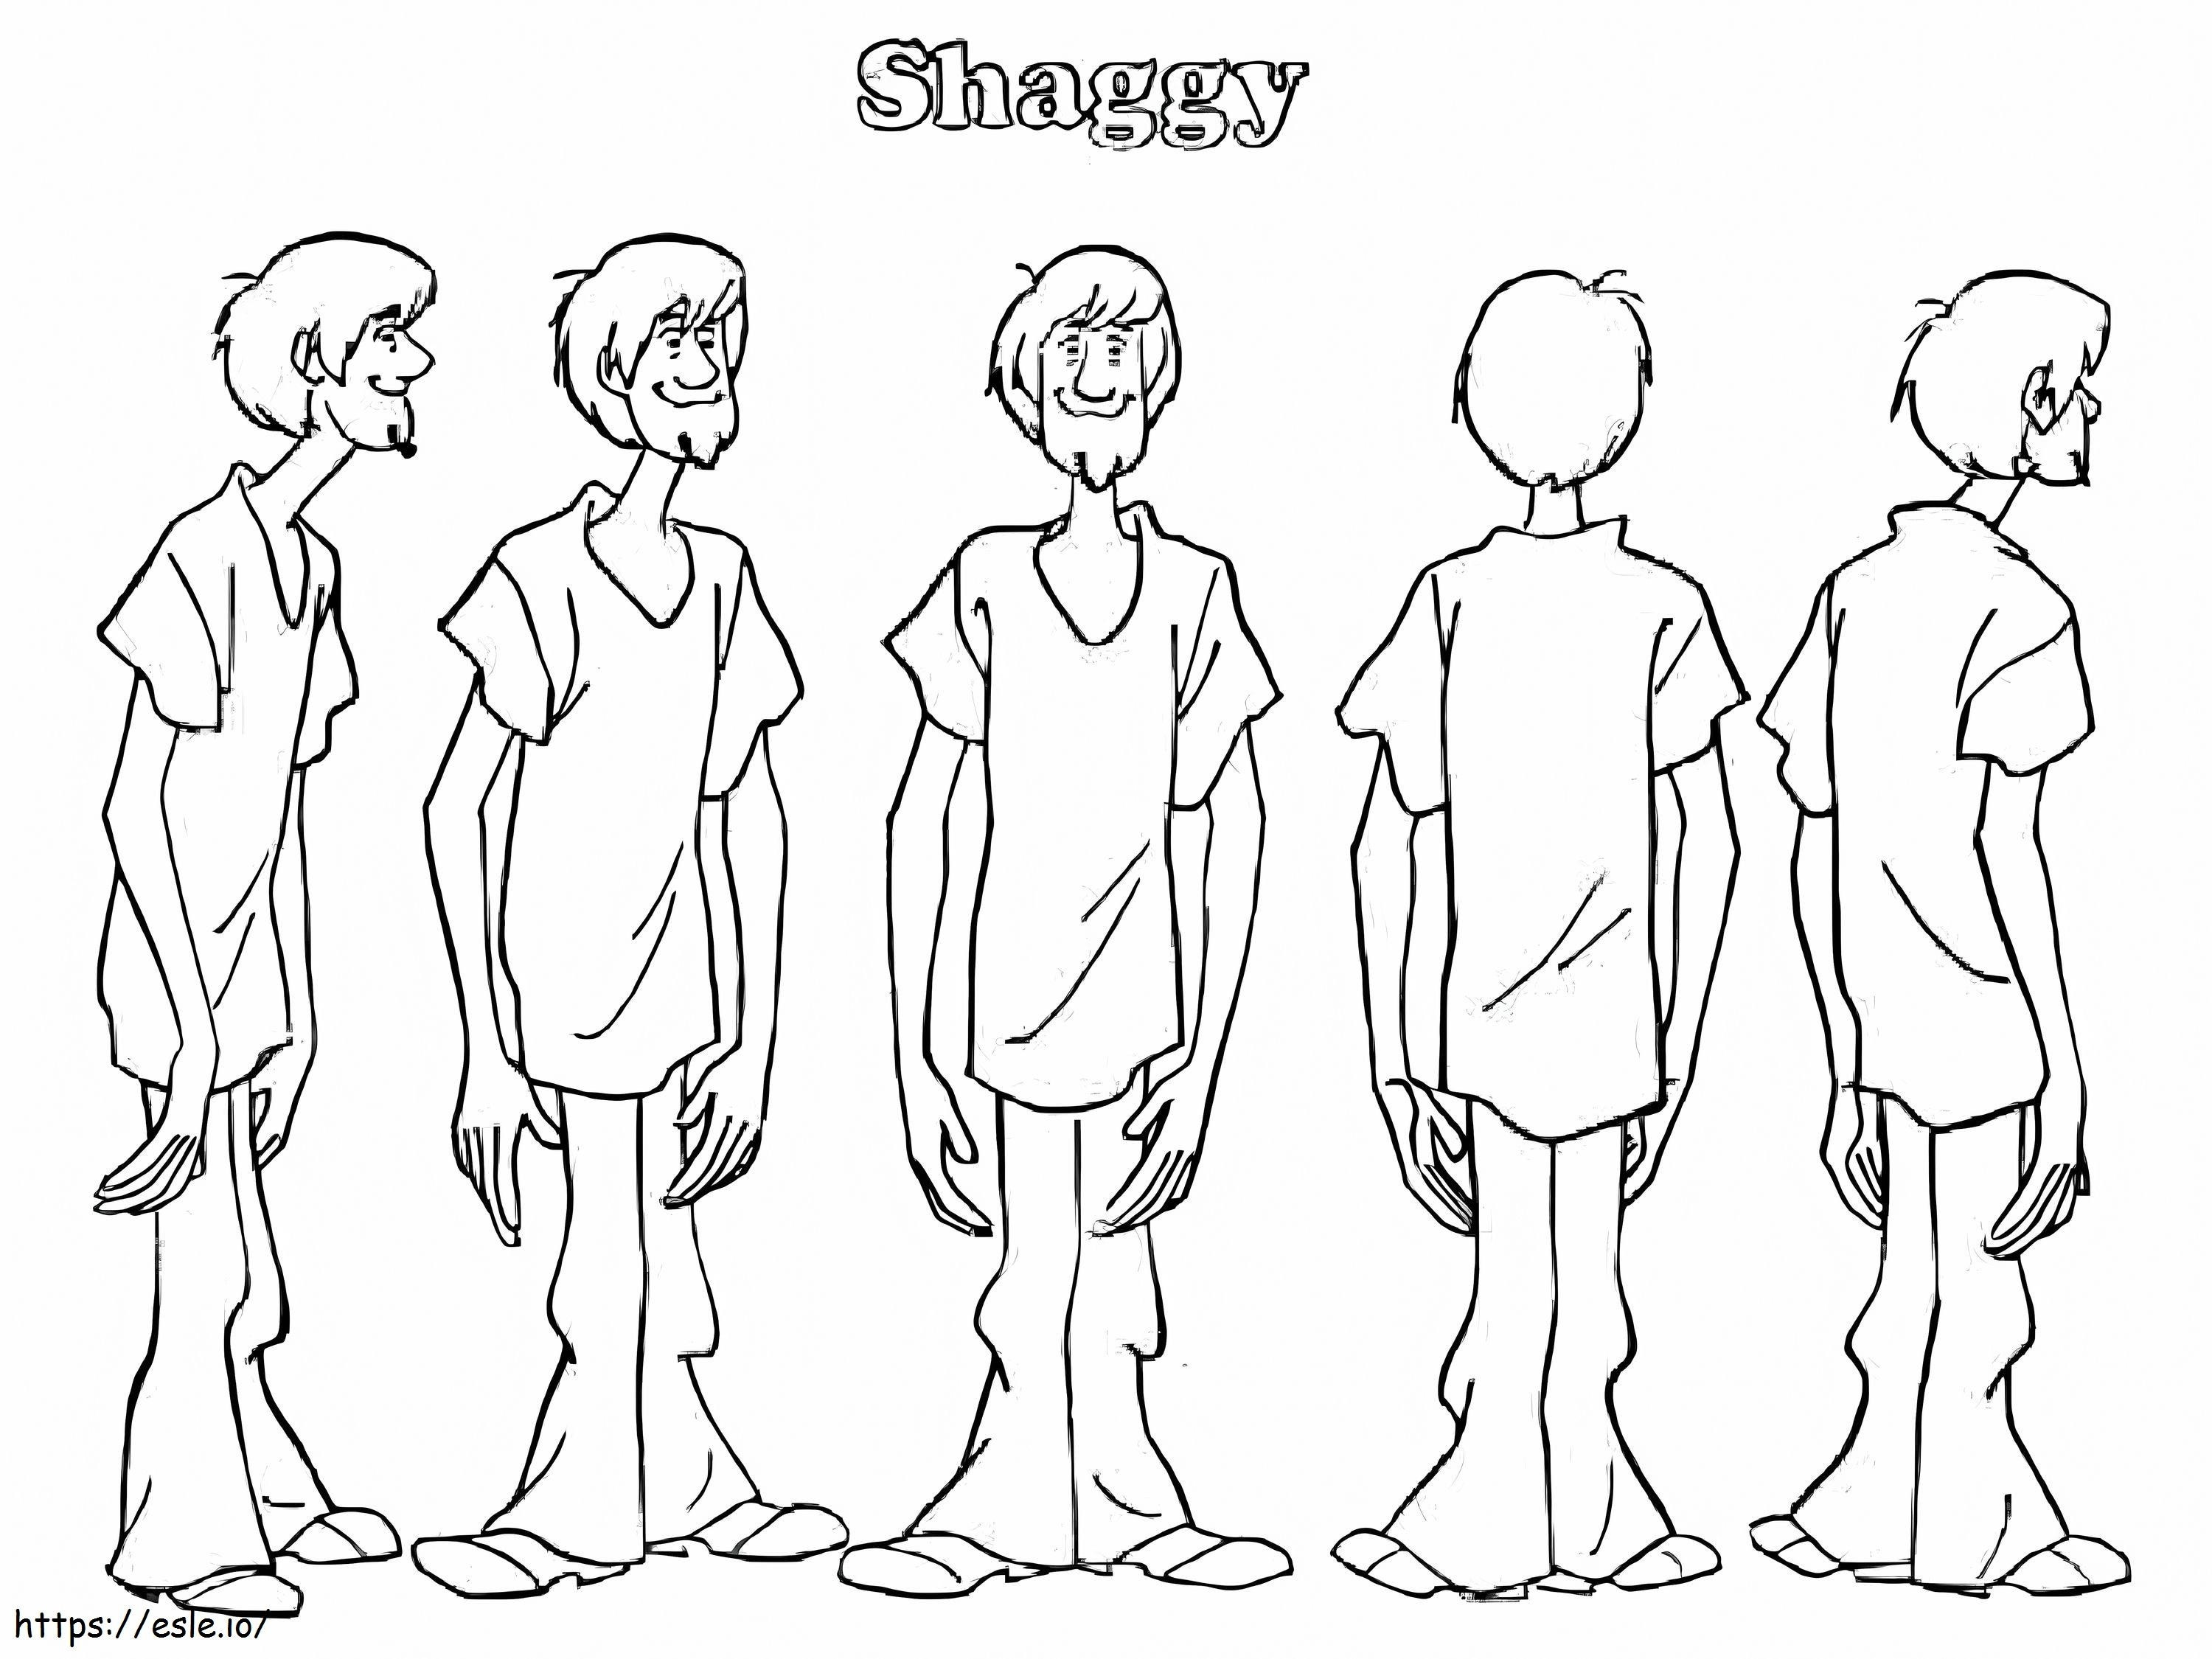 Shaggy 2 coloring page